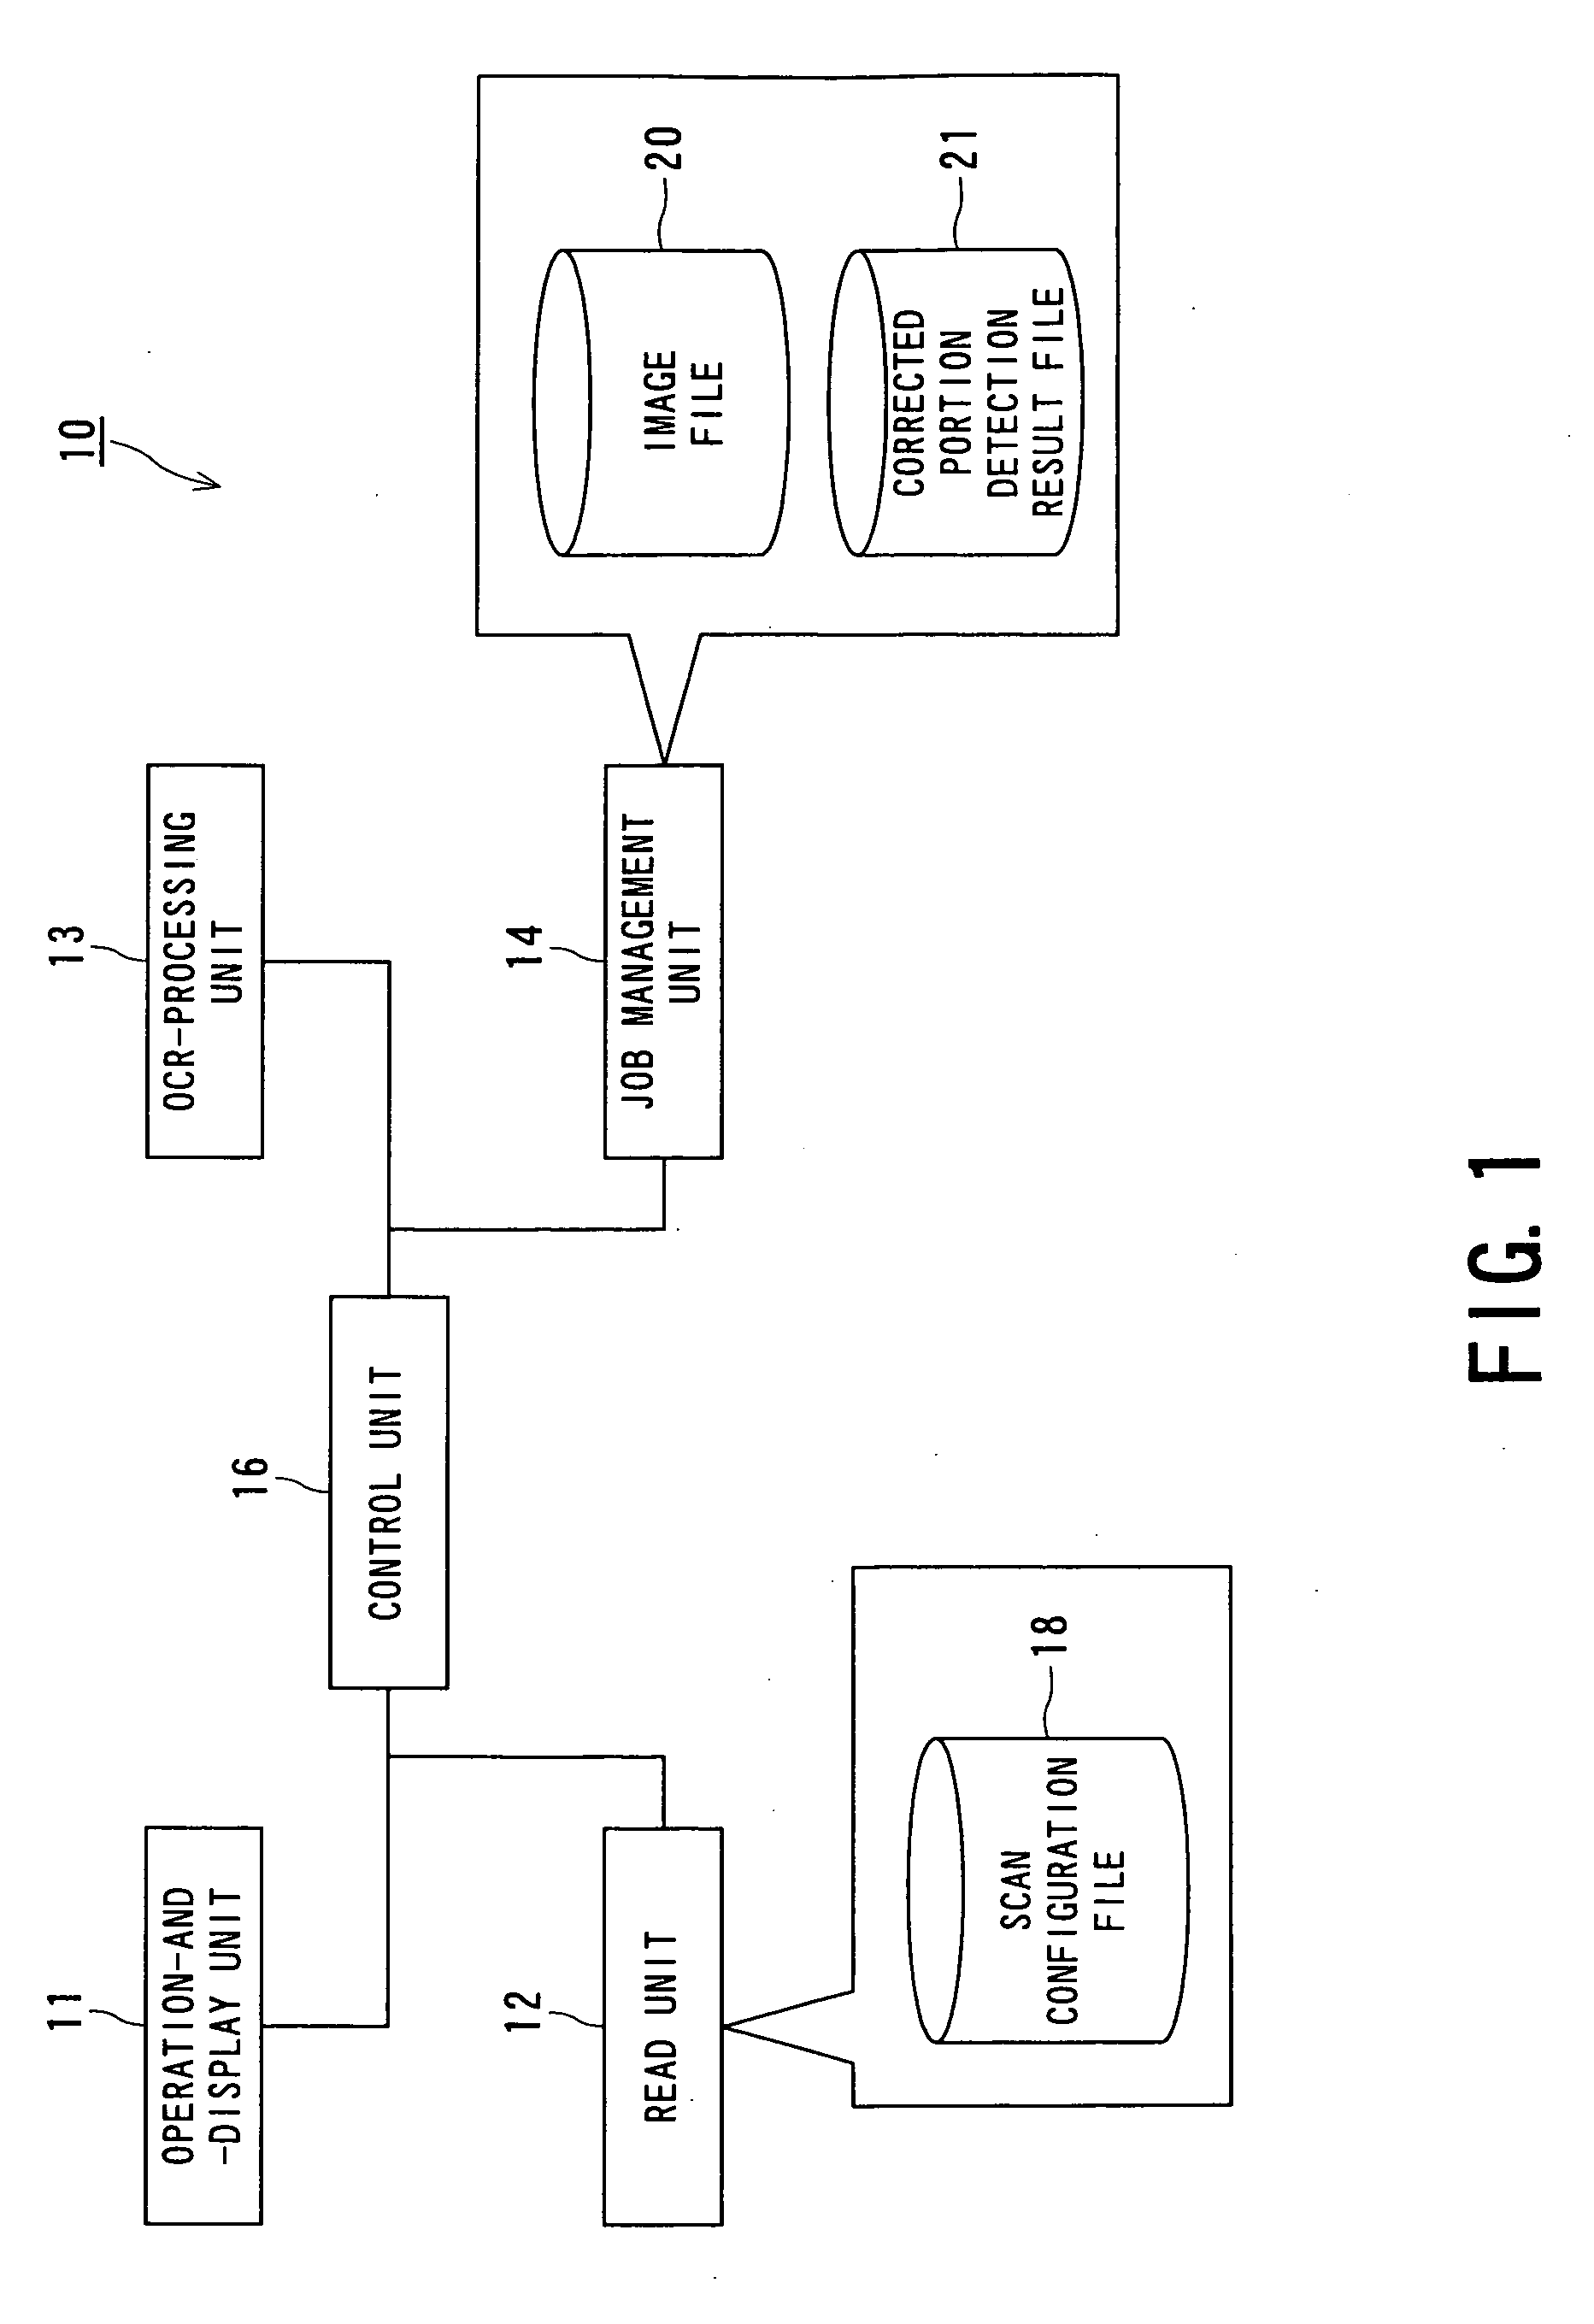 Optical-character-recognition system and optical-character-recognition method